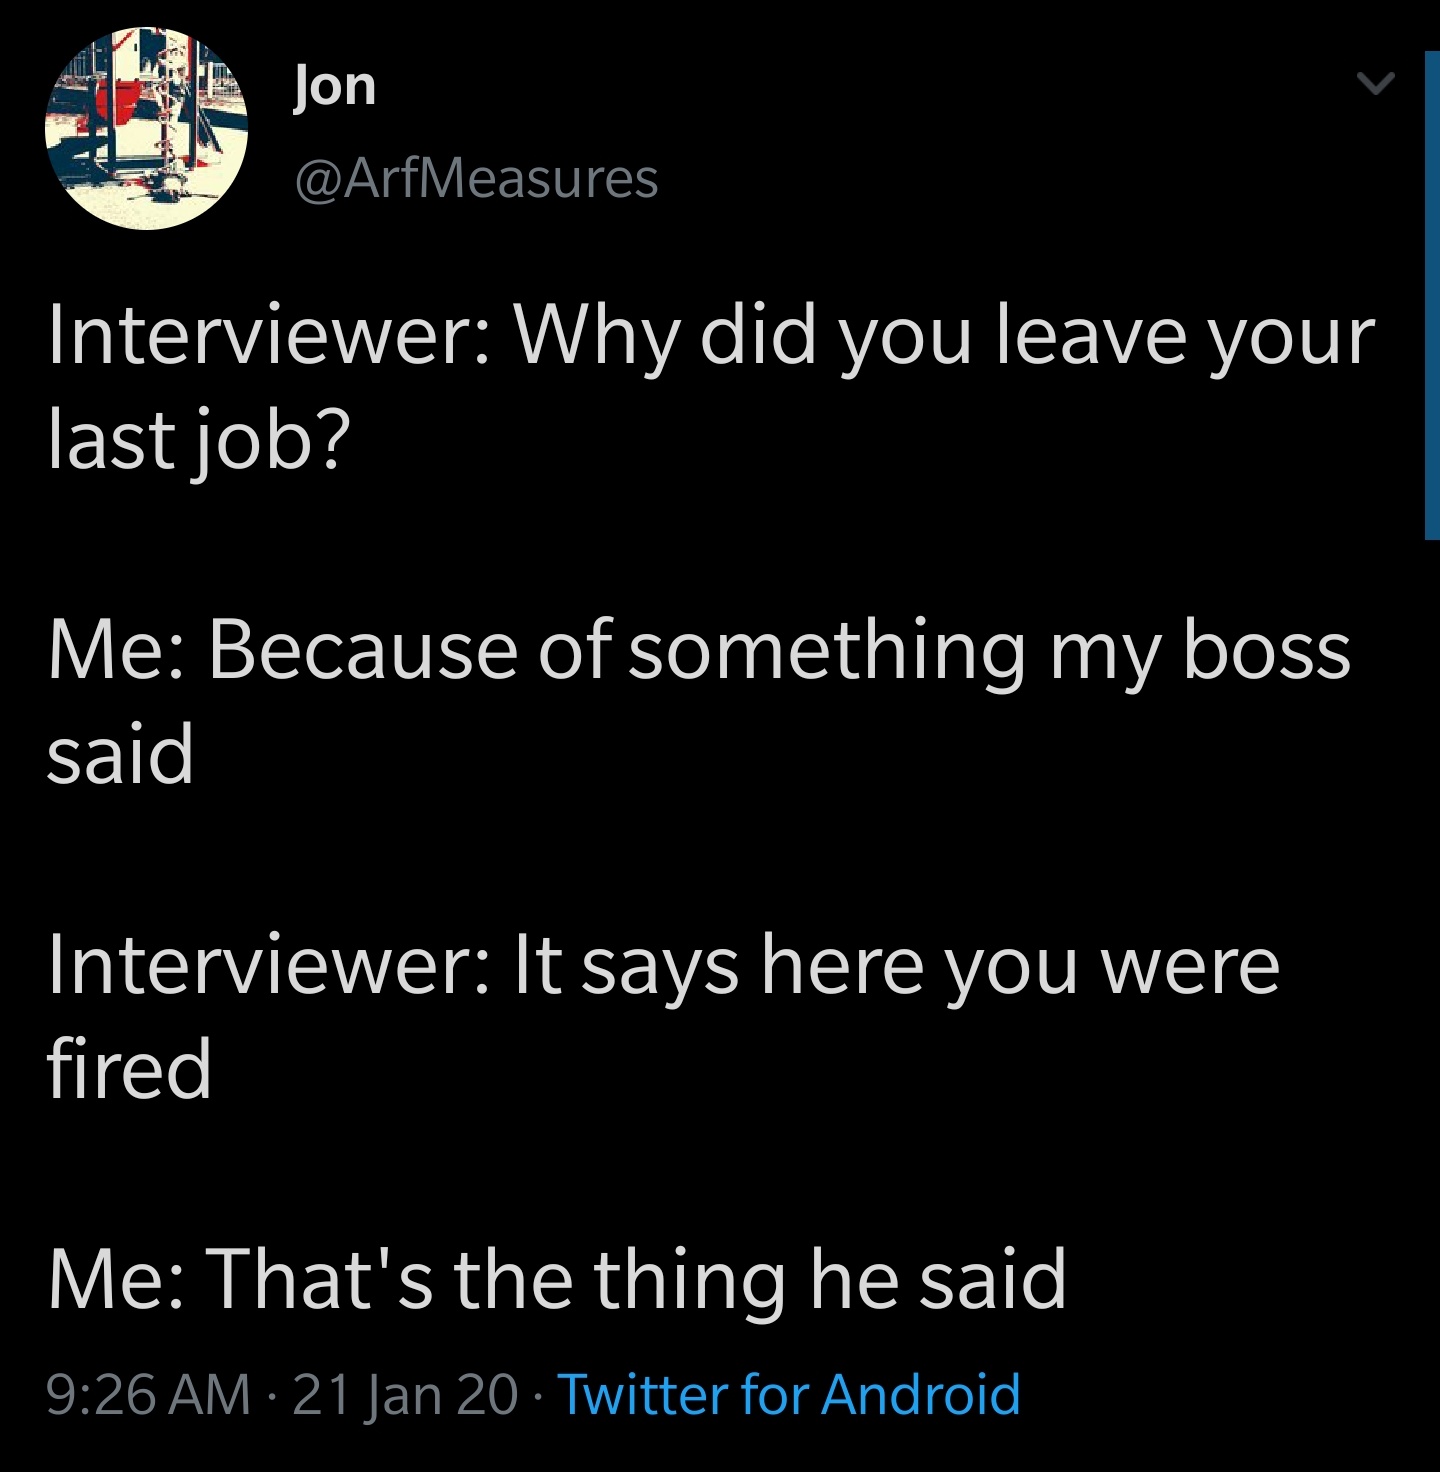 awesome pics and memes - screenshot - Jon Interviewer Why did you leave your last job? Me Because of something my boss said Interviewer It says here you were fired Me That's the thing he said 21 Jan 20 Twitter for Android D Batte